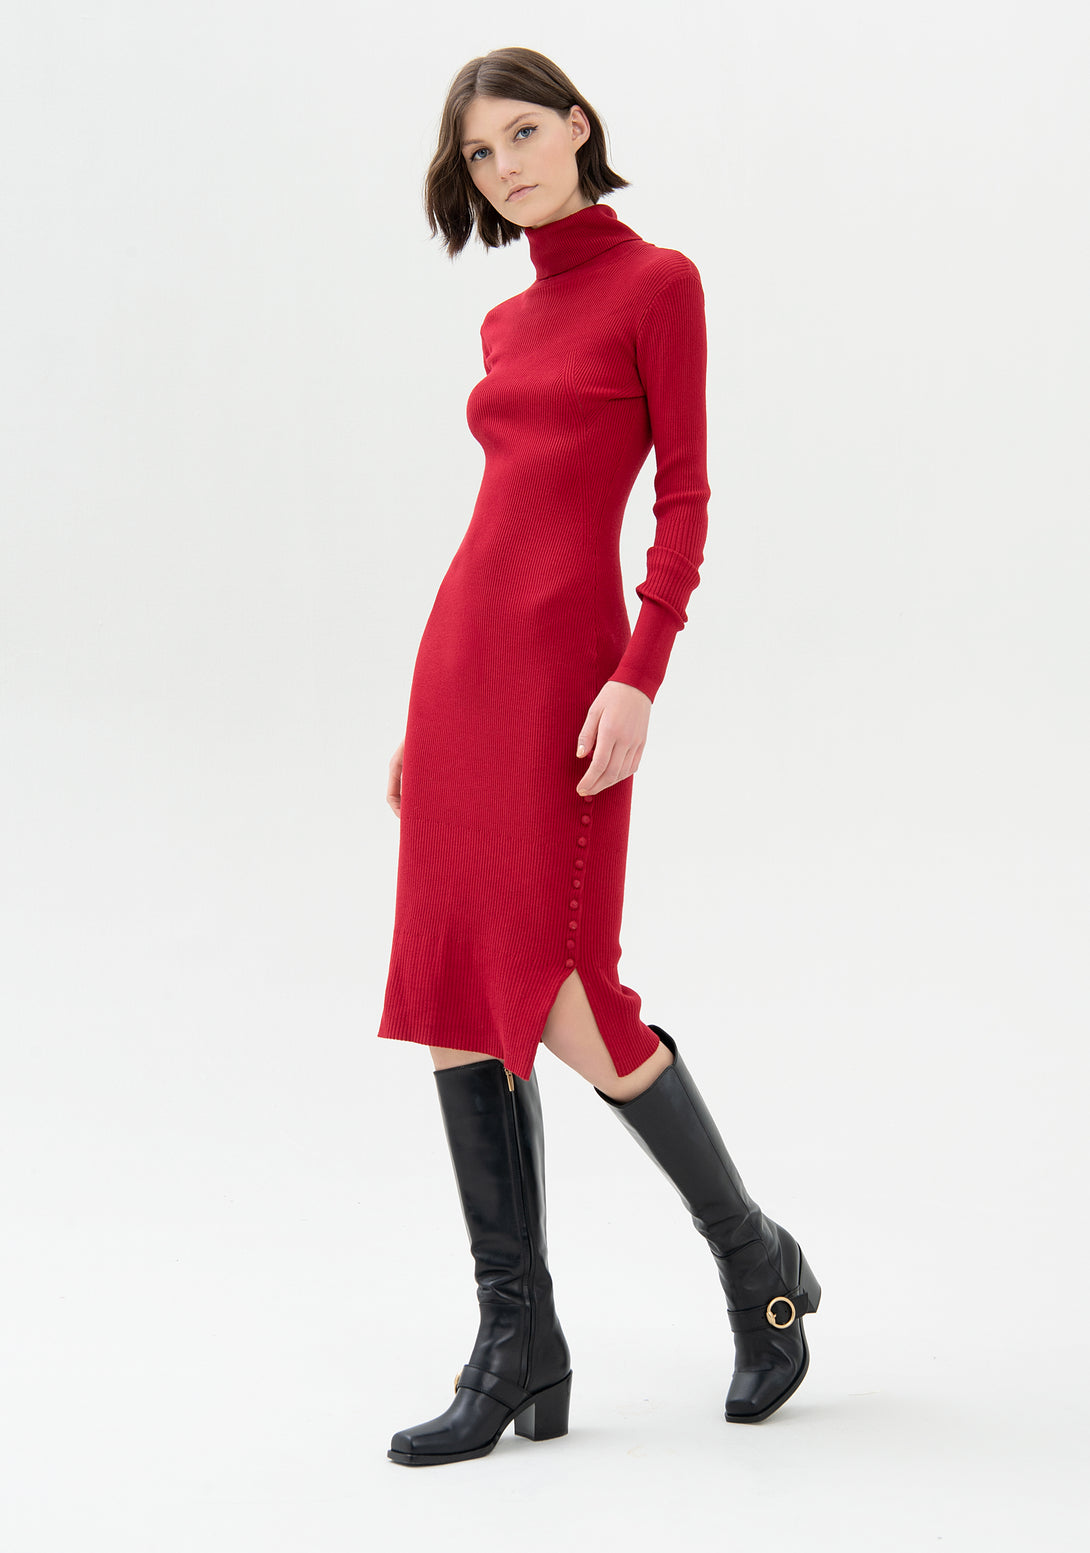 Knitted dress tight fit middle length made with rib stitch